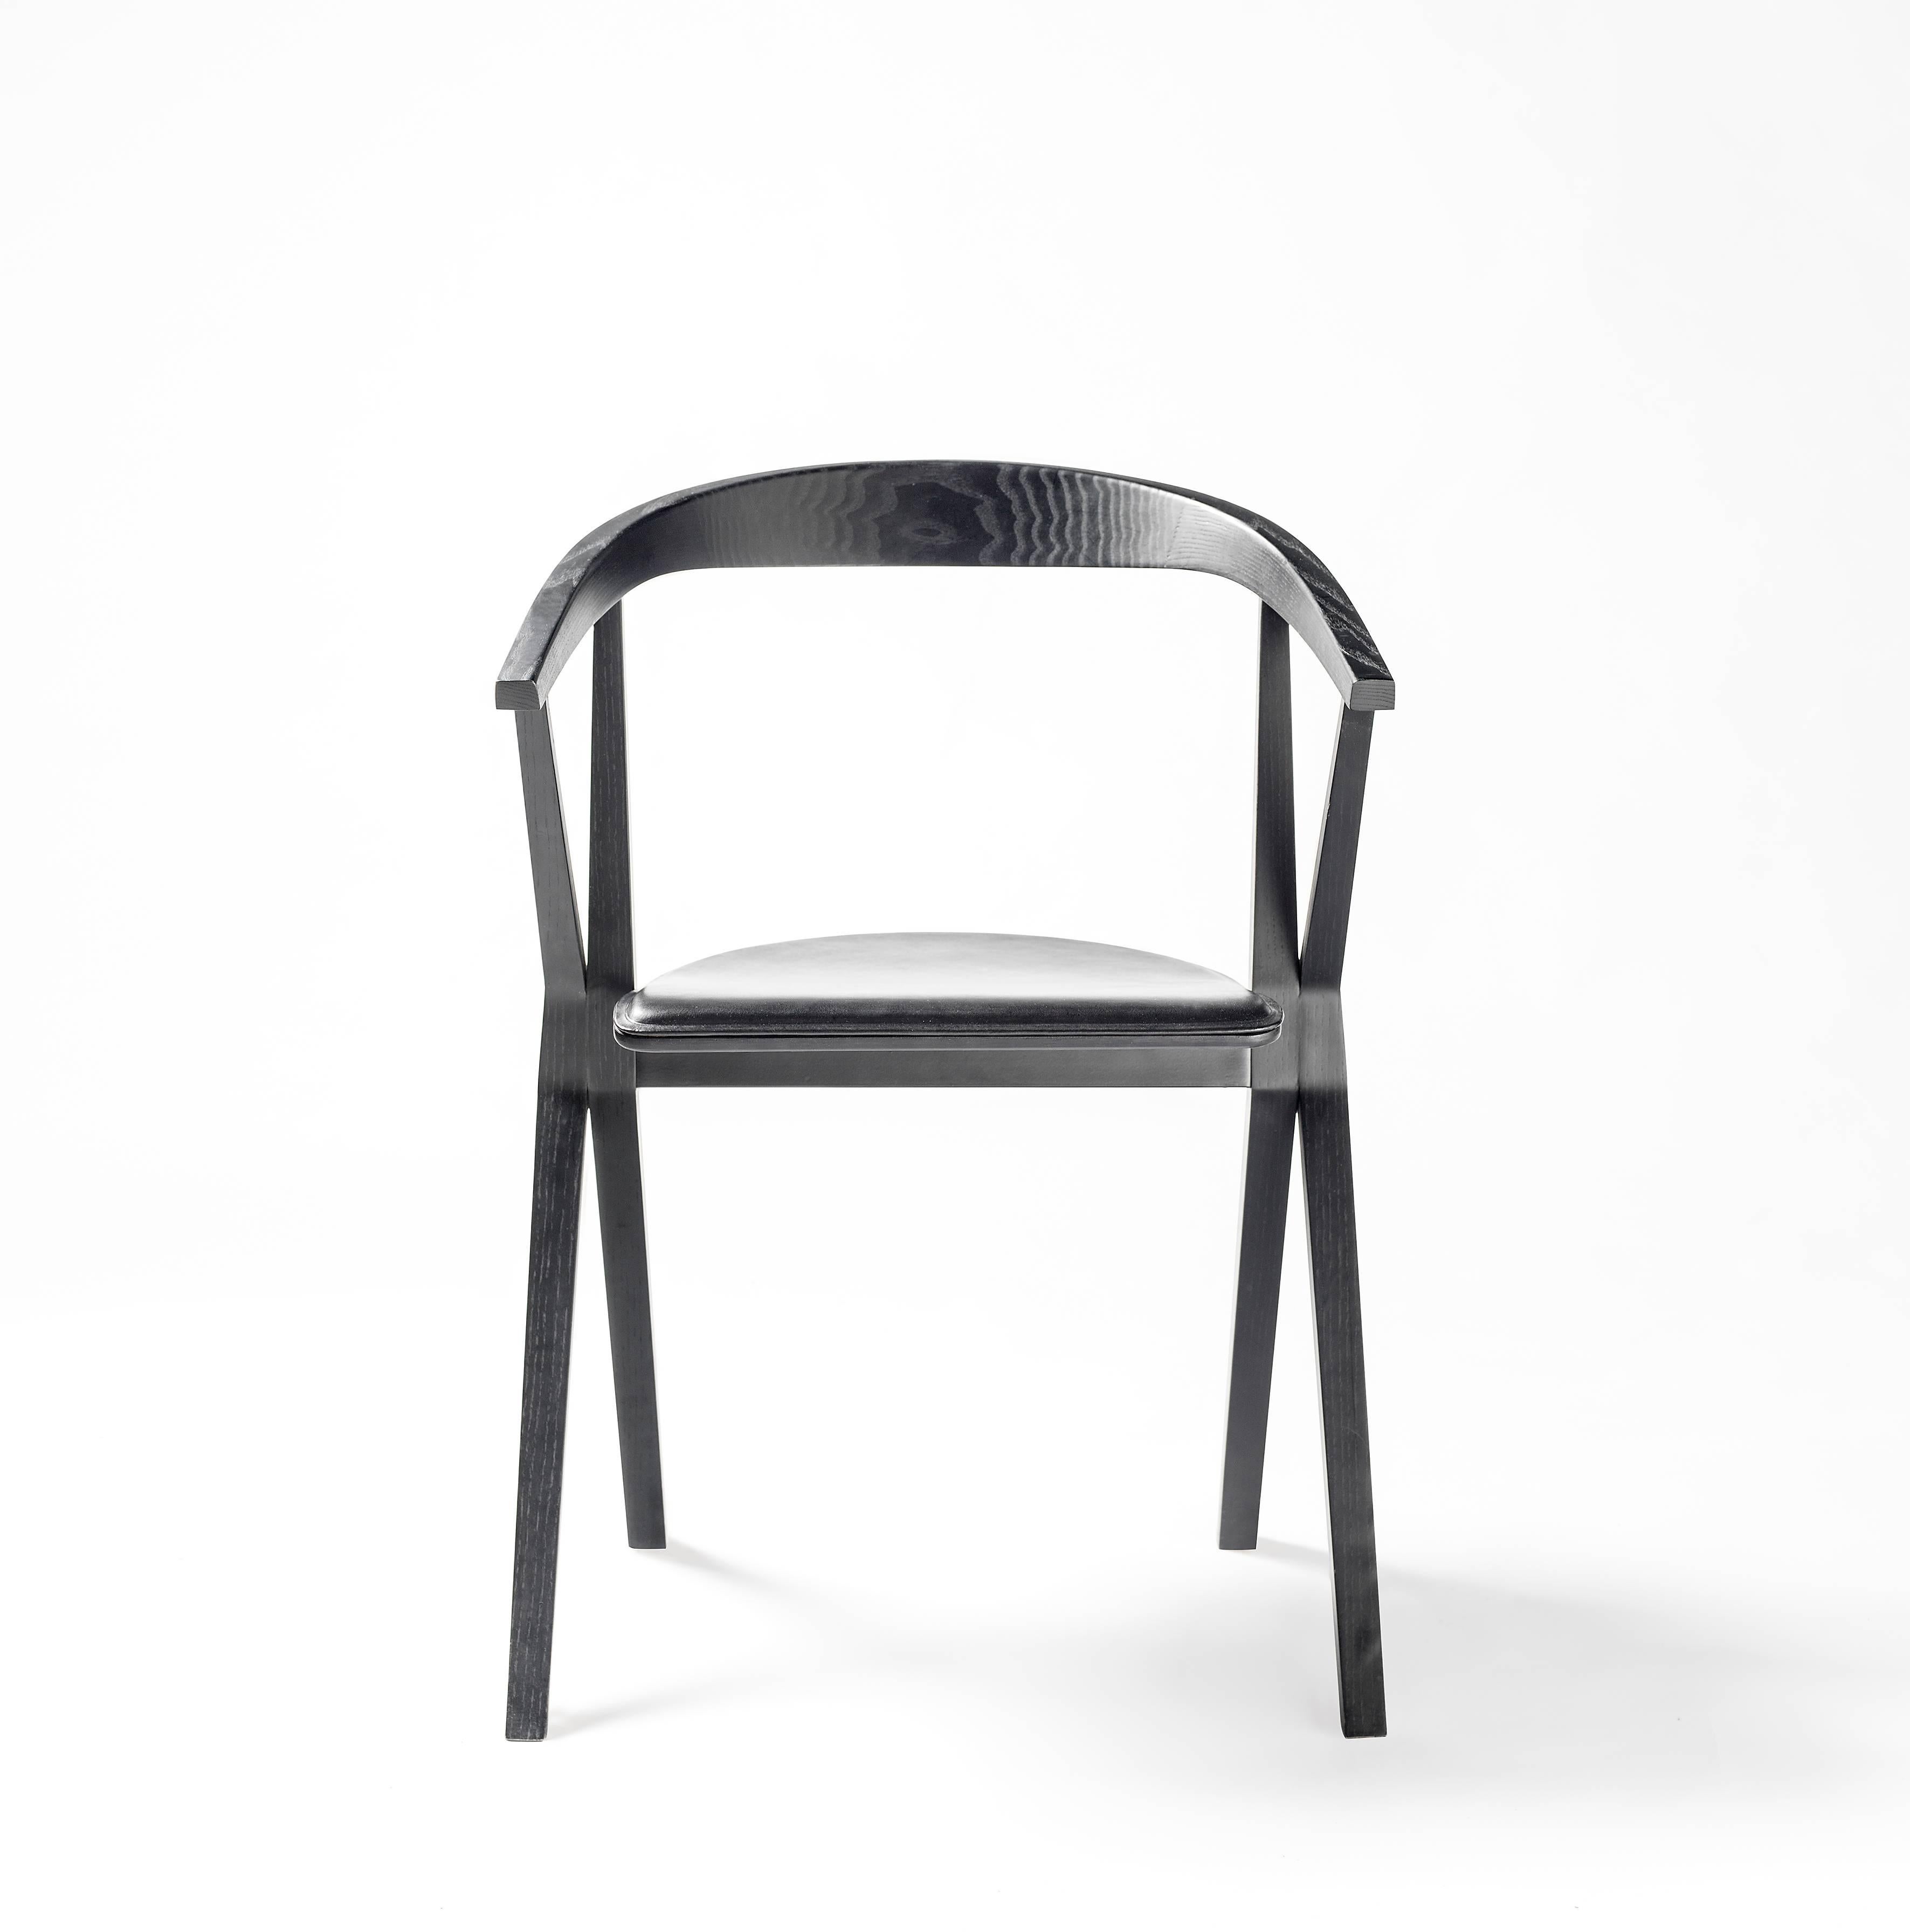 This chair won the ADI-FAD Delta Silver Award in 2011. In its singularity, complex engineering is hidden. The very fact that the seat can be folded up opens the possibilities for the use of this chair in multi-use spaces.

Silver Delta Award